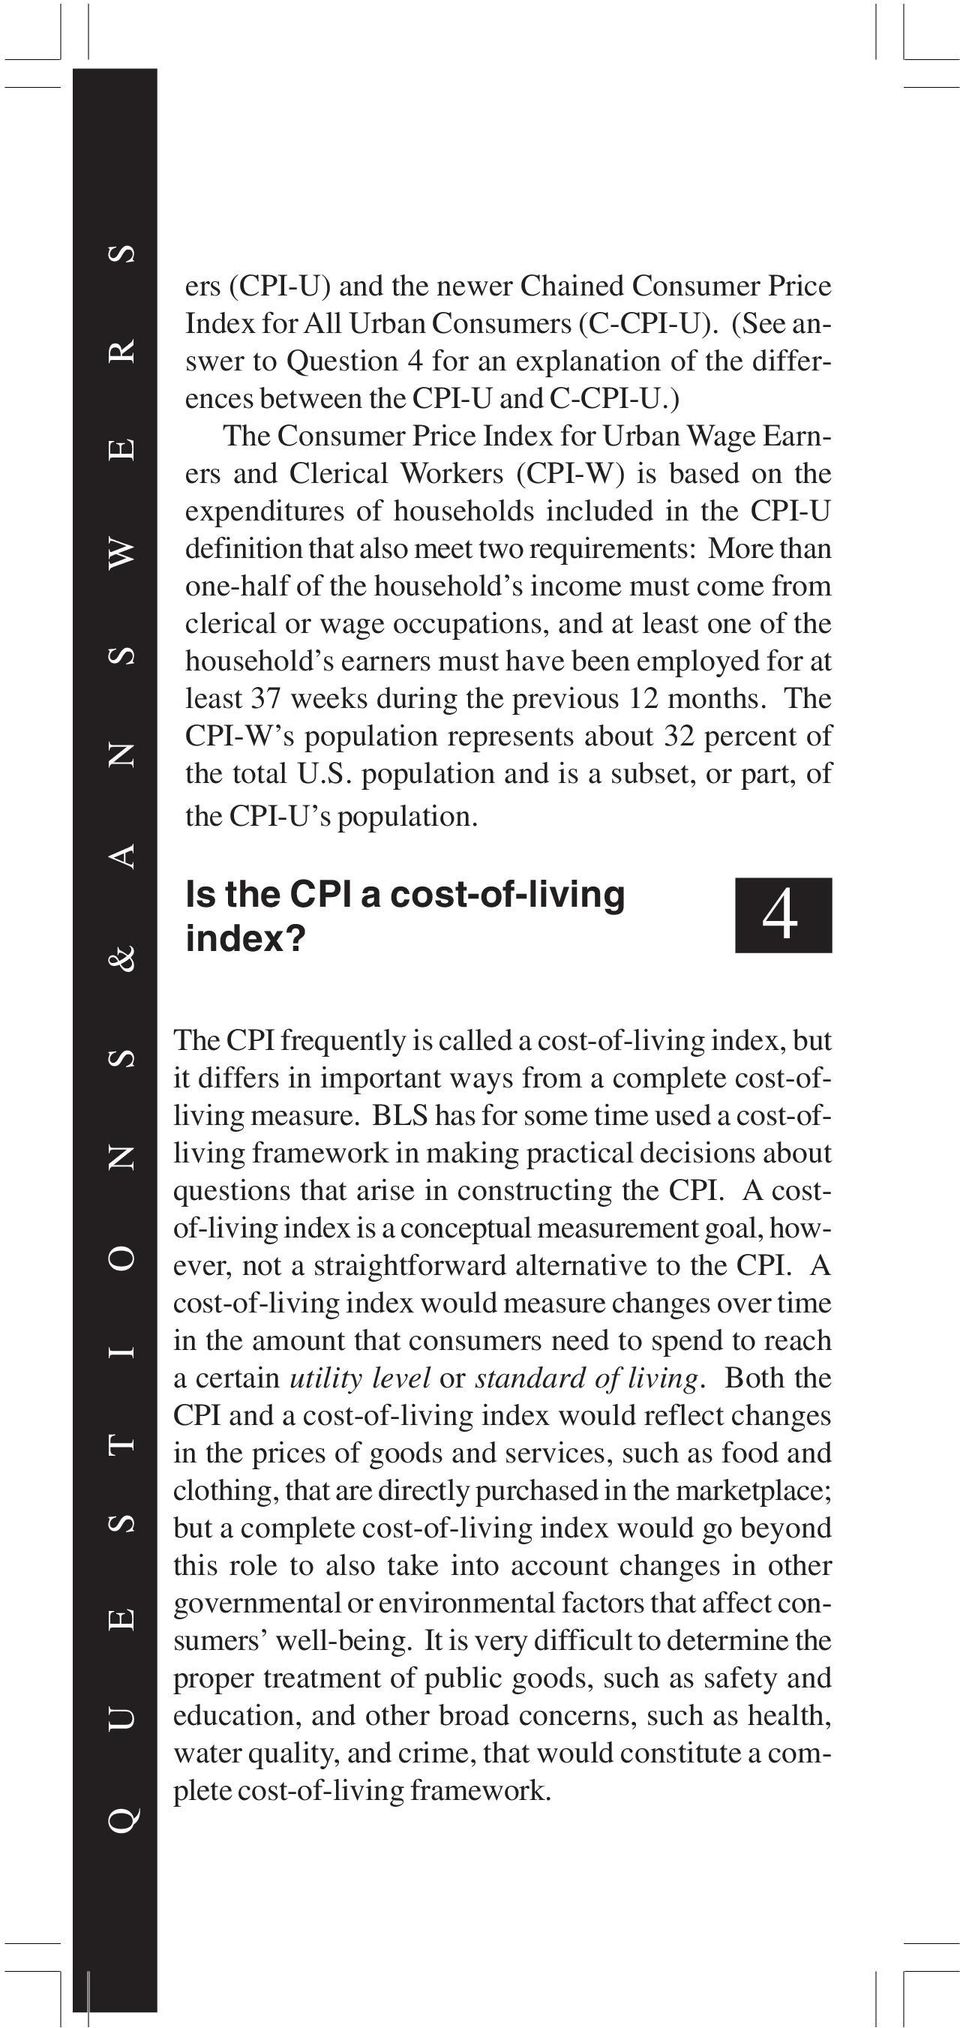 ) The Consumer Price Index for Urban Wage Earners and Clerical Workers (CPI-W) is based on the expenditures of households included in the CPI-U definition that also meet two requirements: More than